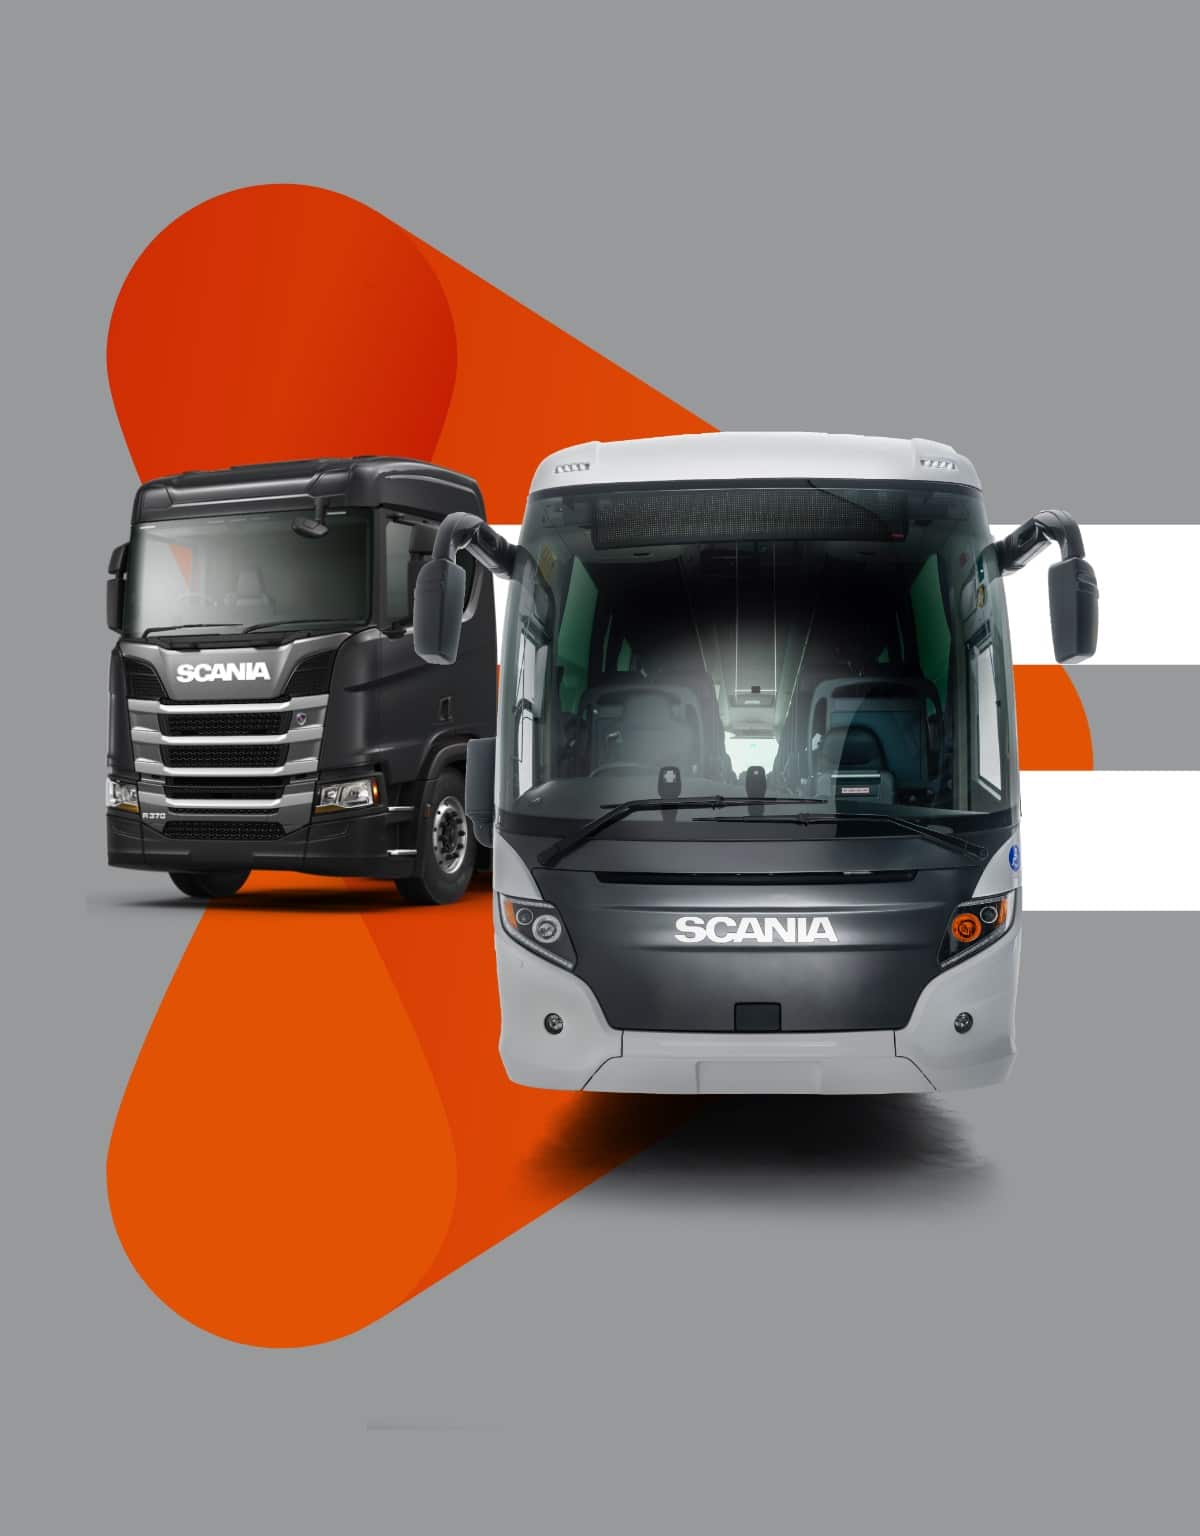 Scania Go launched by Scania as premium used platform